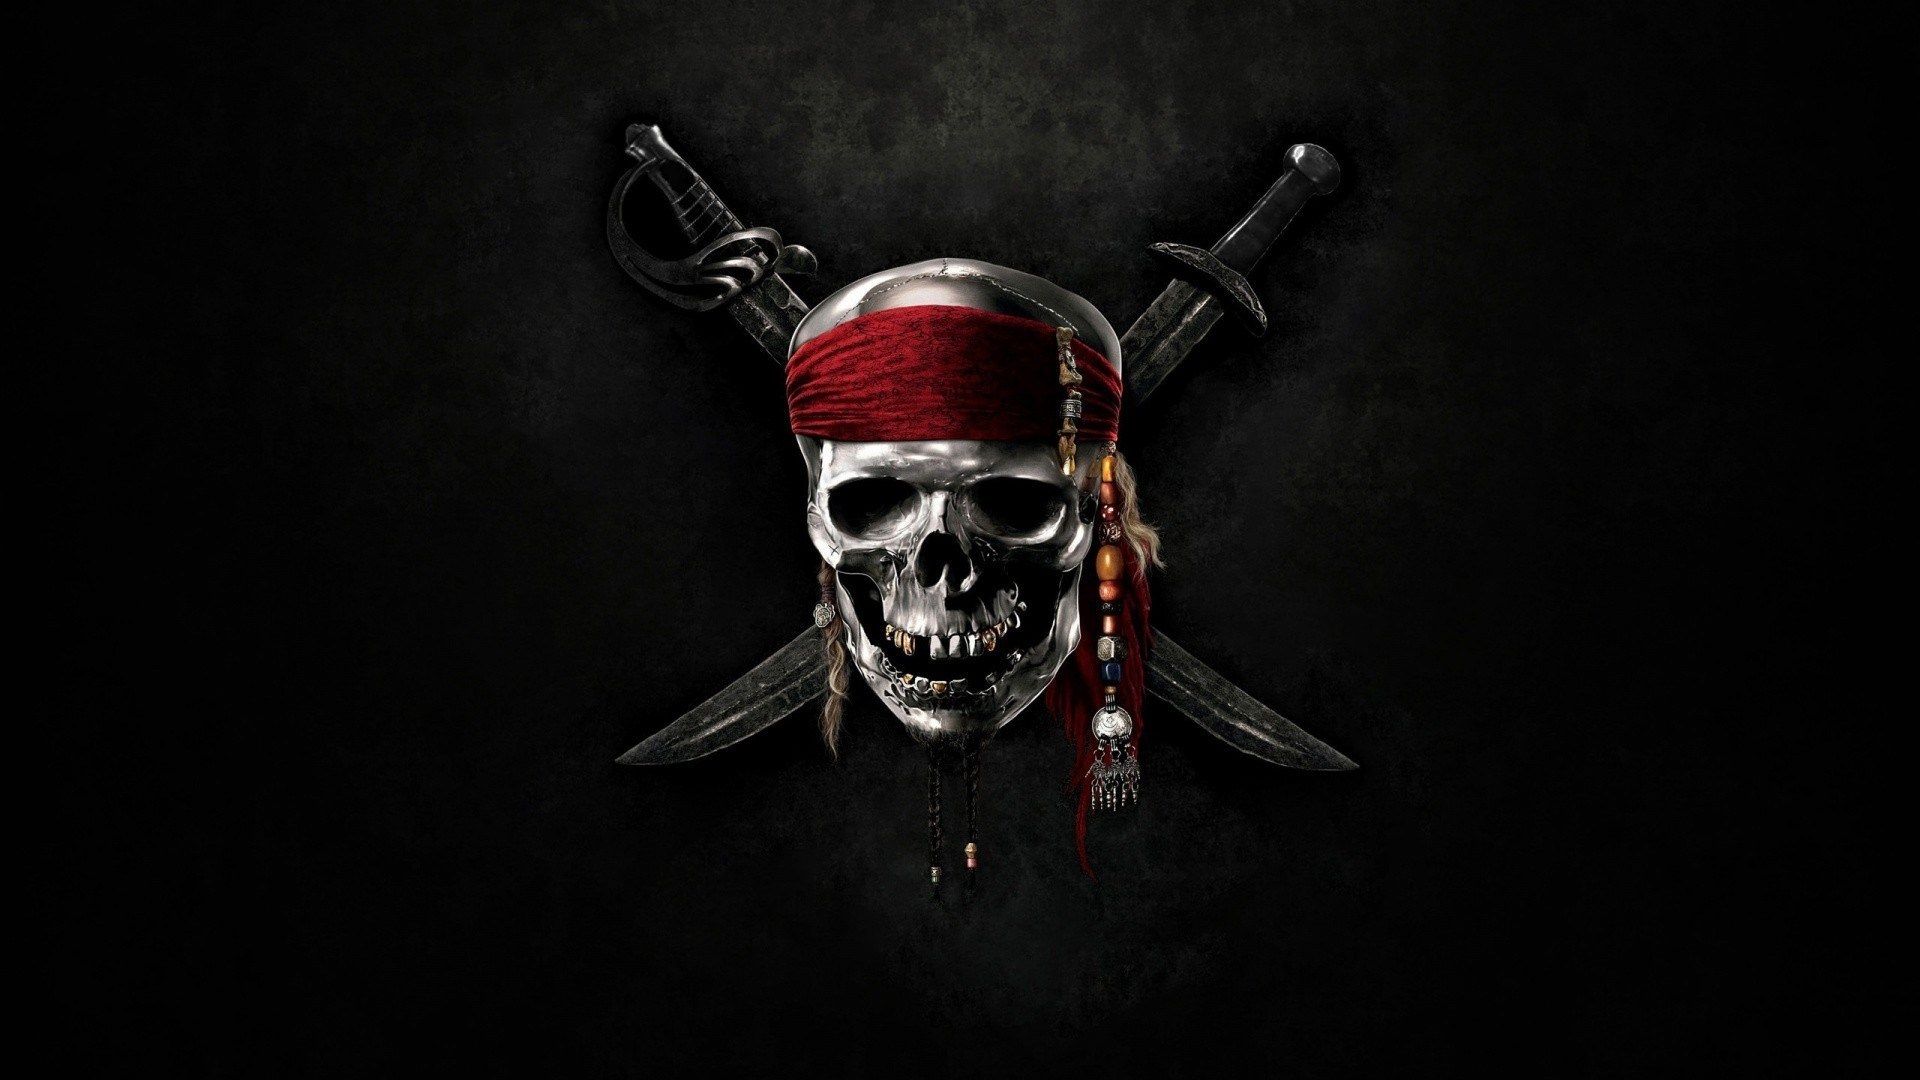 pirates of the caribbean HD wallpaper for desktop. Skull wallpaper, Pirates of the caribbean, HD skull wallpaper